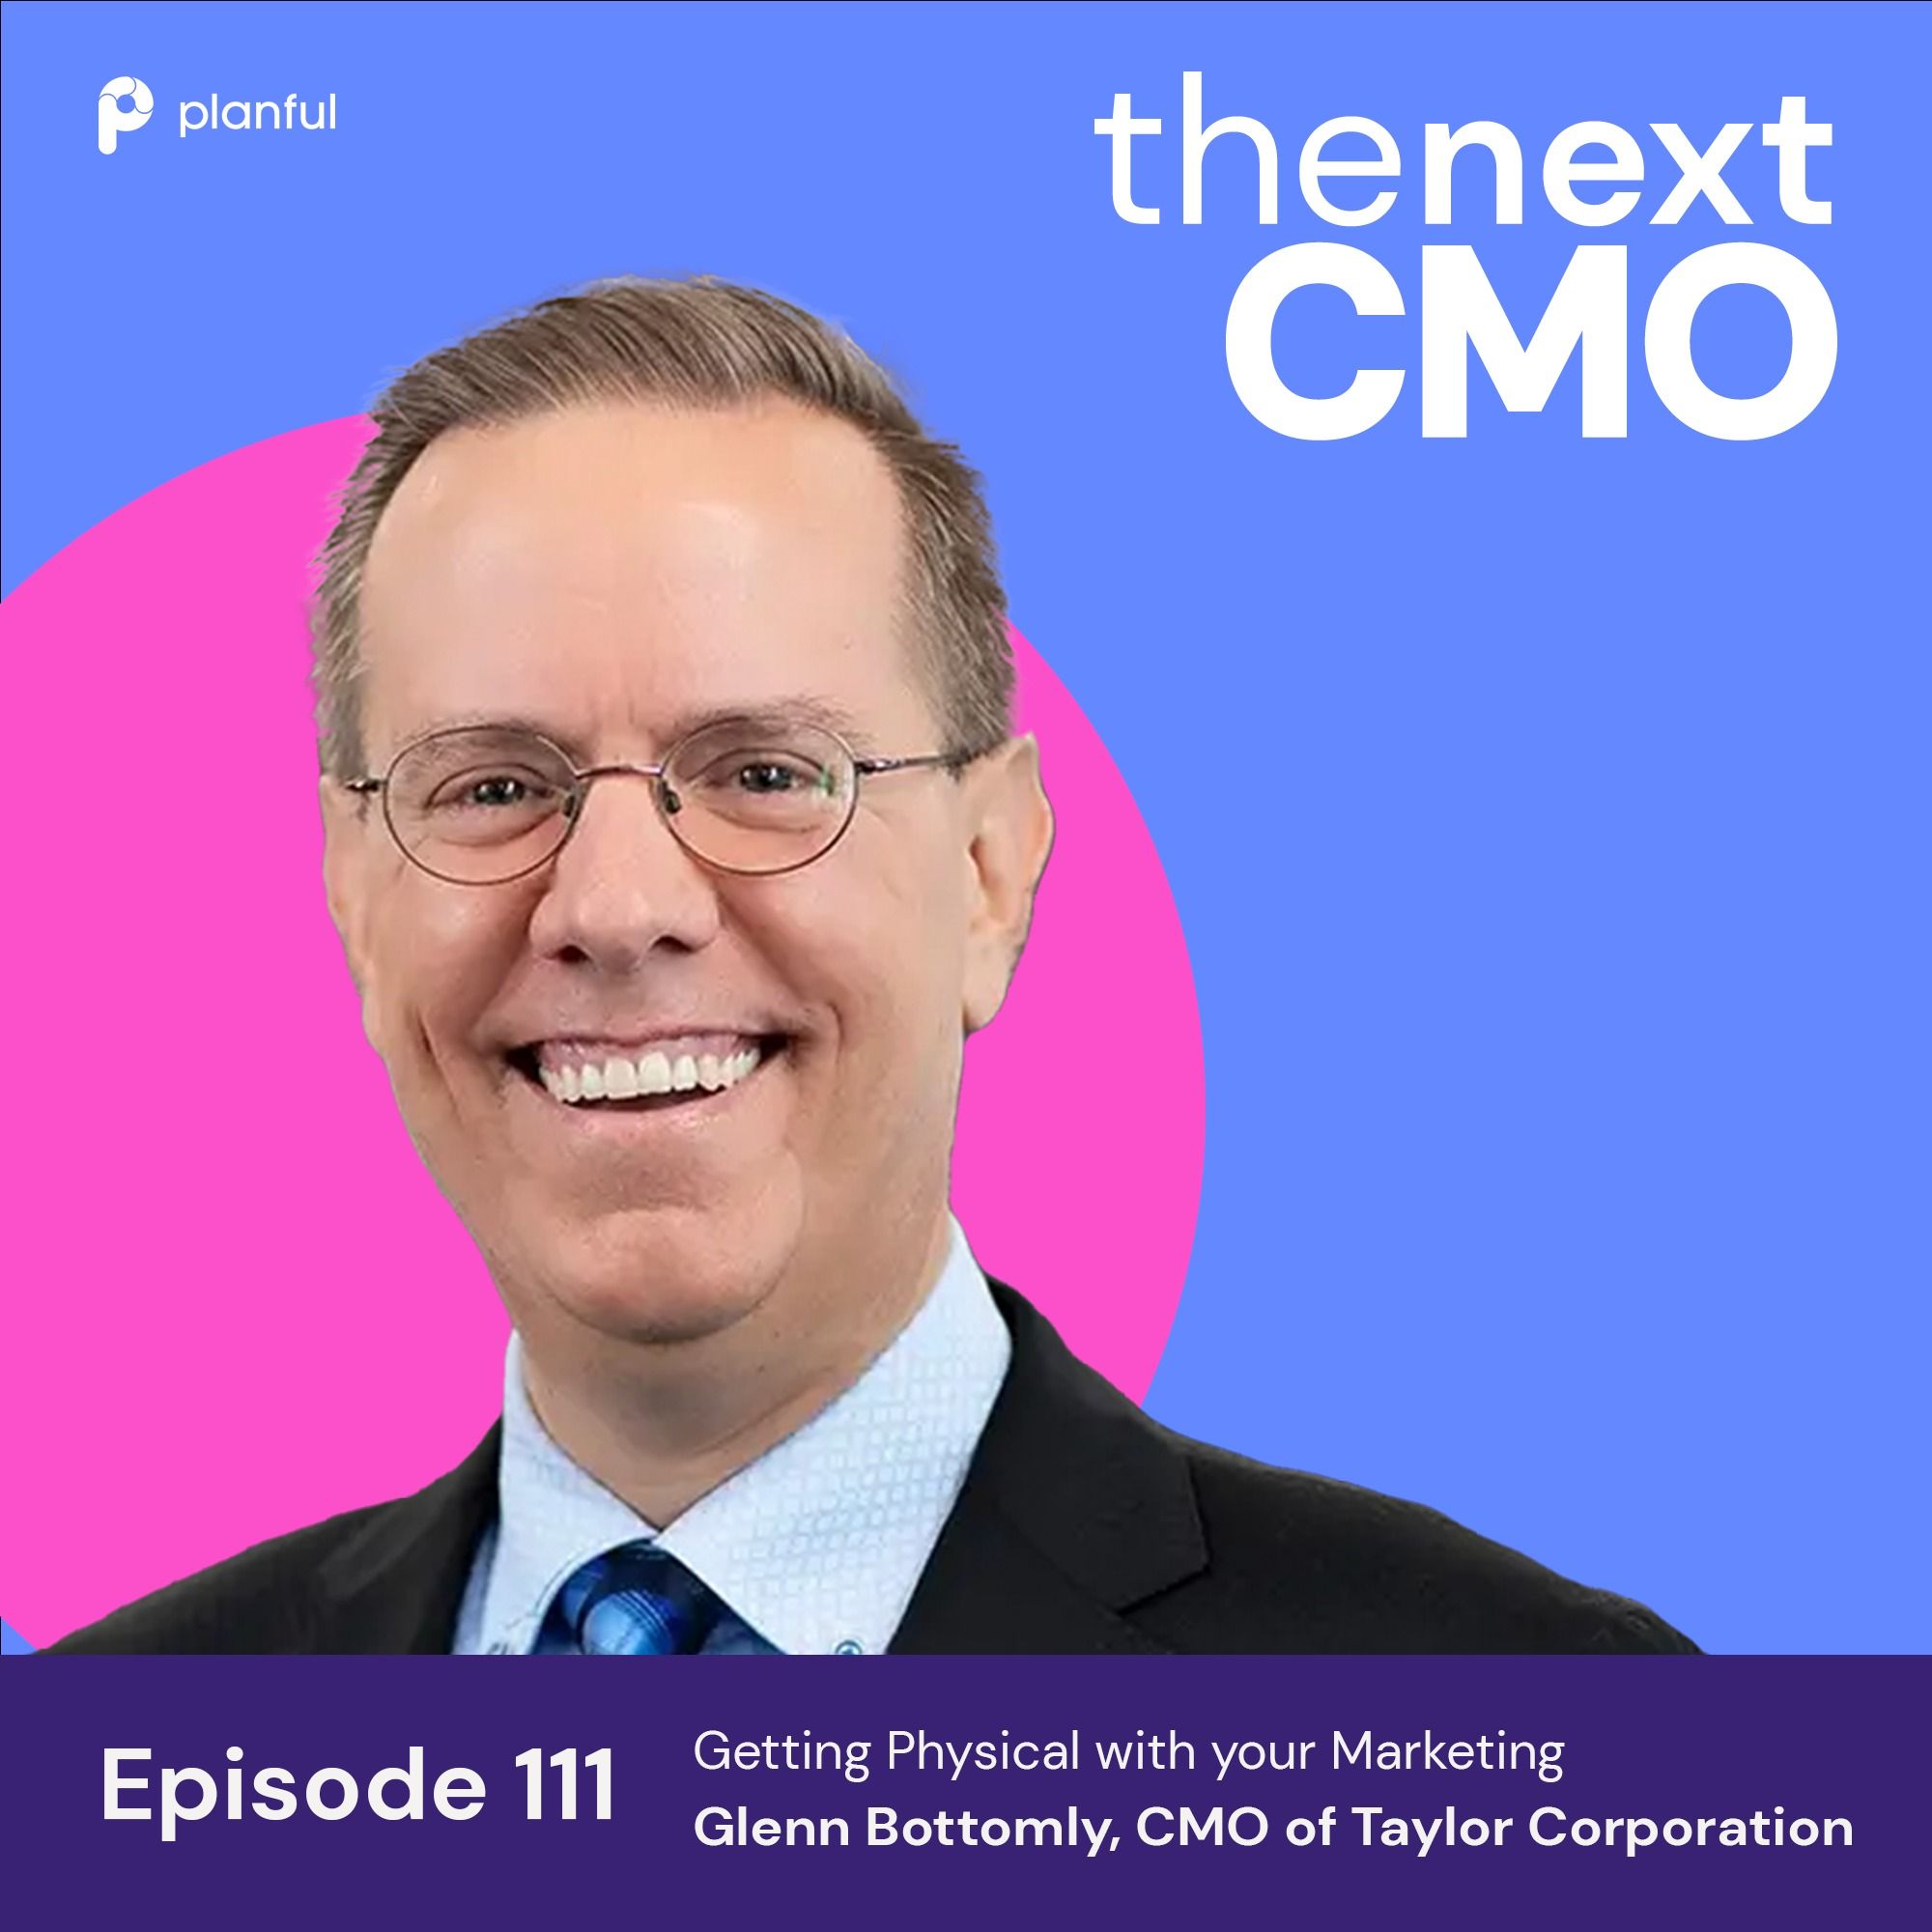 Getting Physical with your Marketing with Glenn Bottomly, CMO of  Taylor Corporation